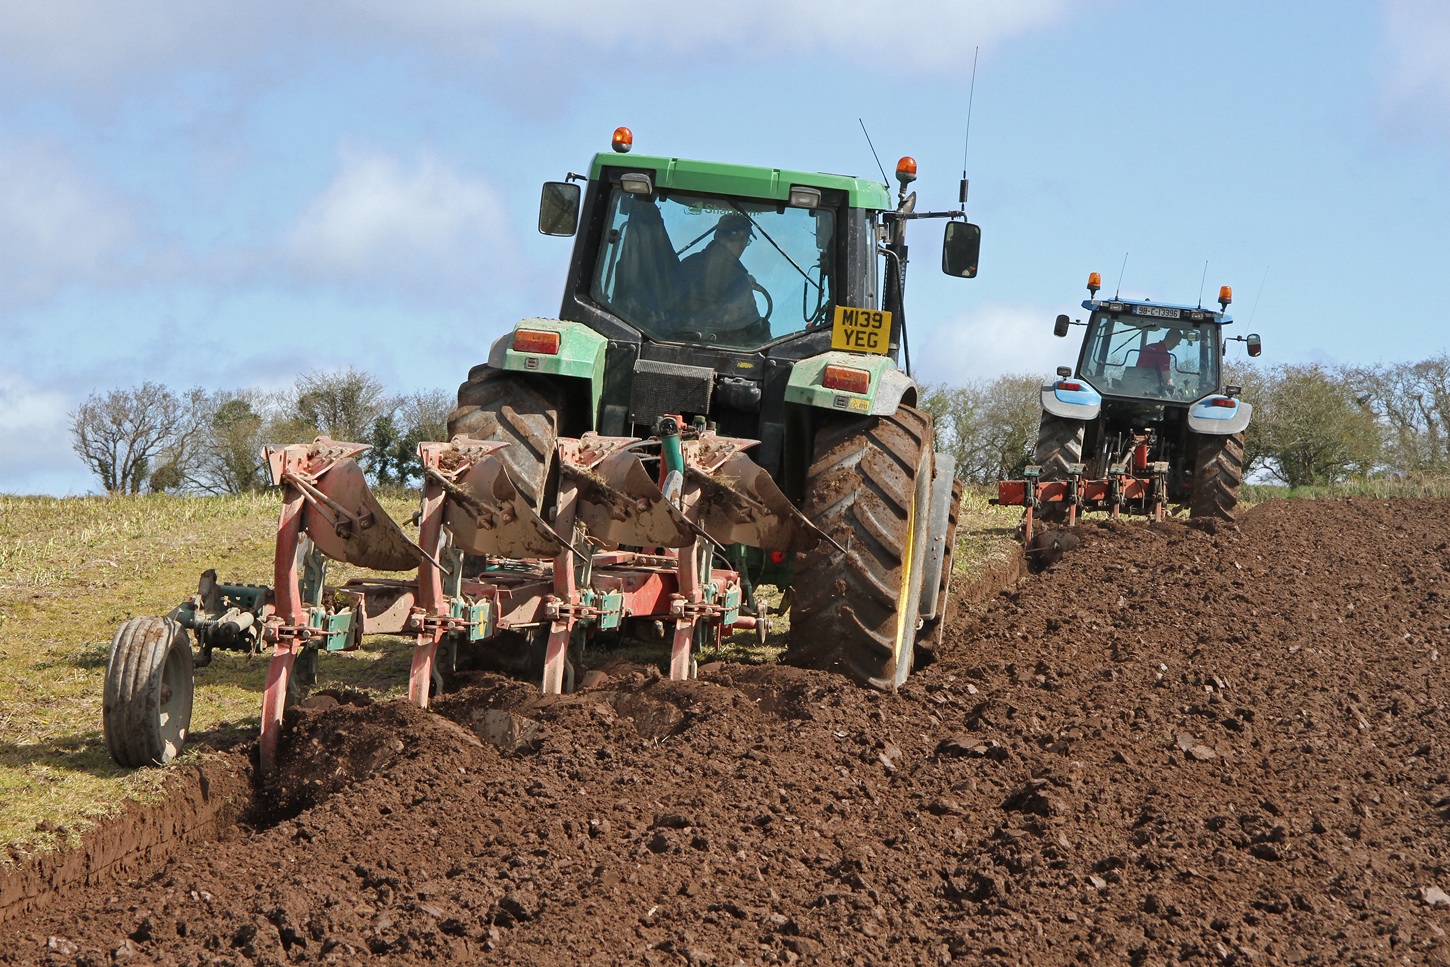 An Expensive Decision to Plough Up Grassland?